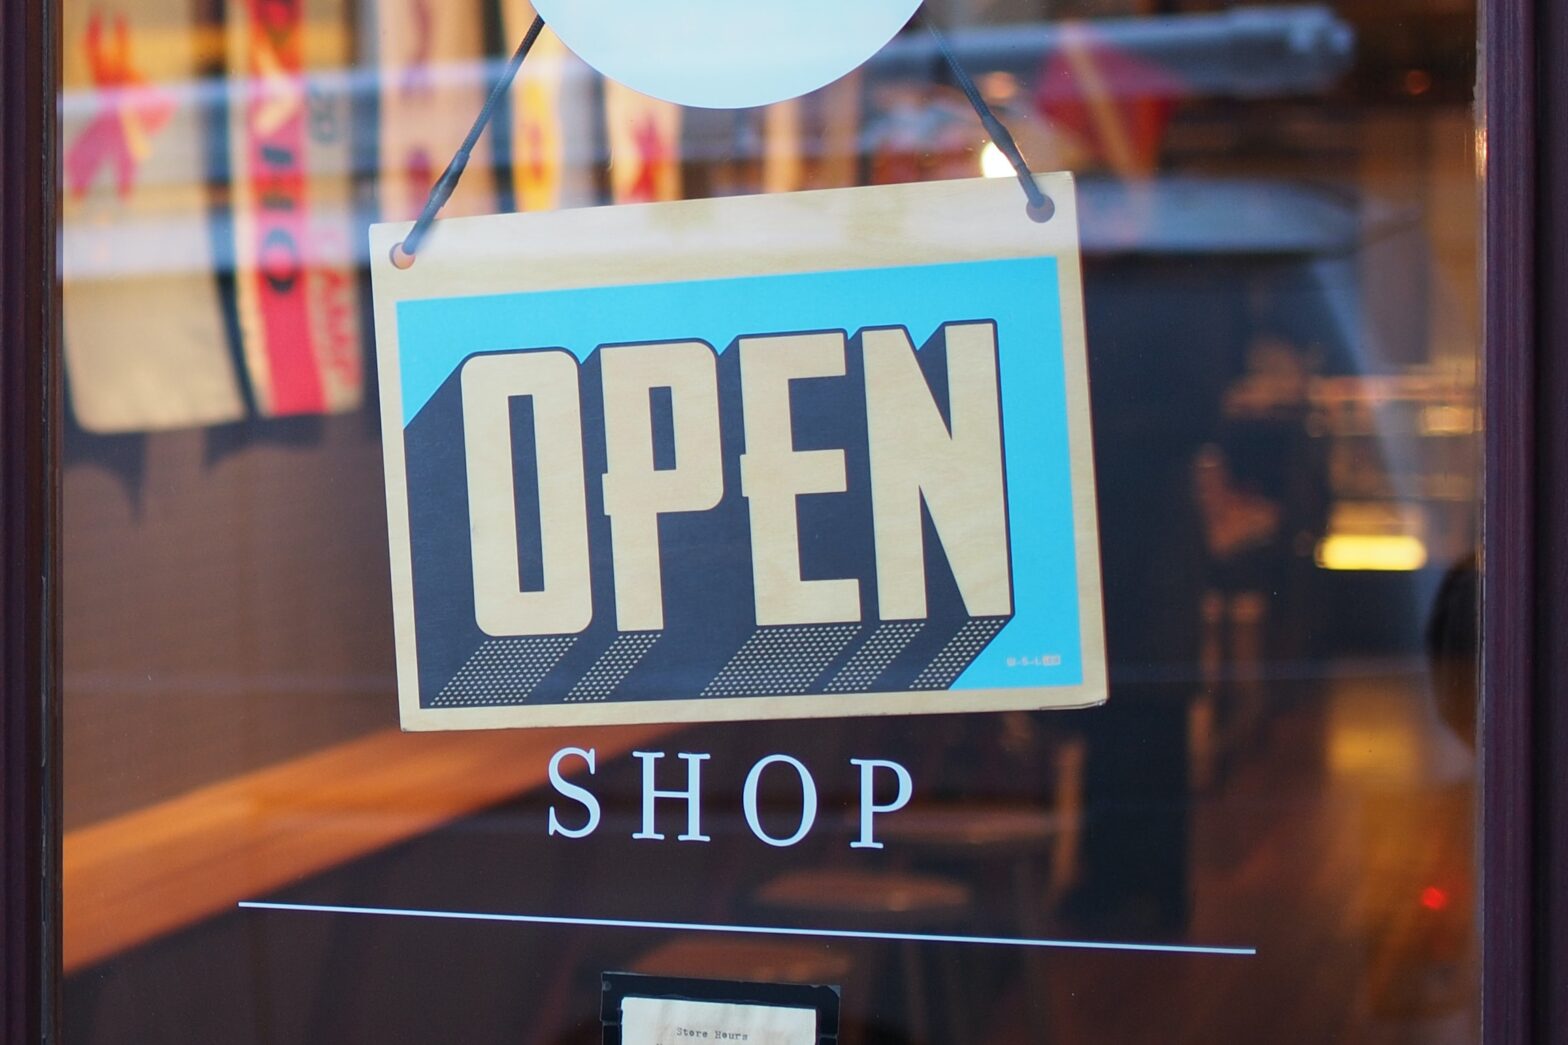 Shop open sign - marketing strategy for a new business